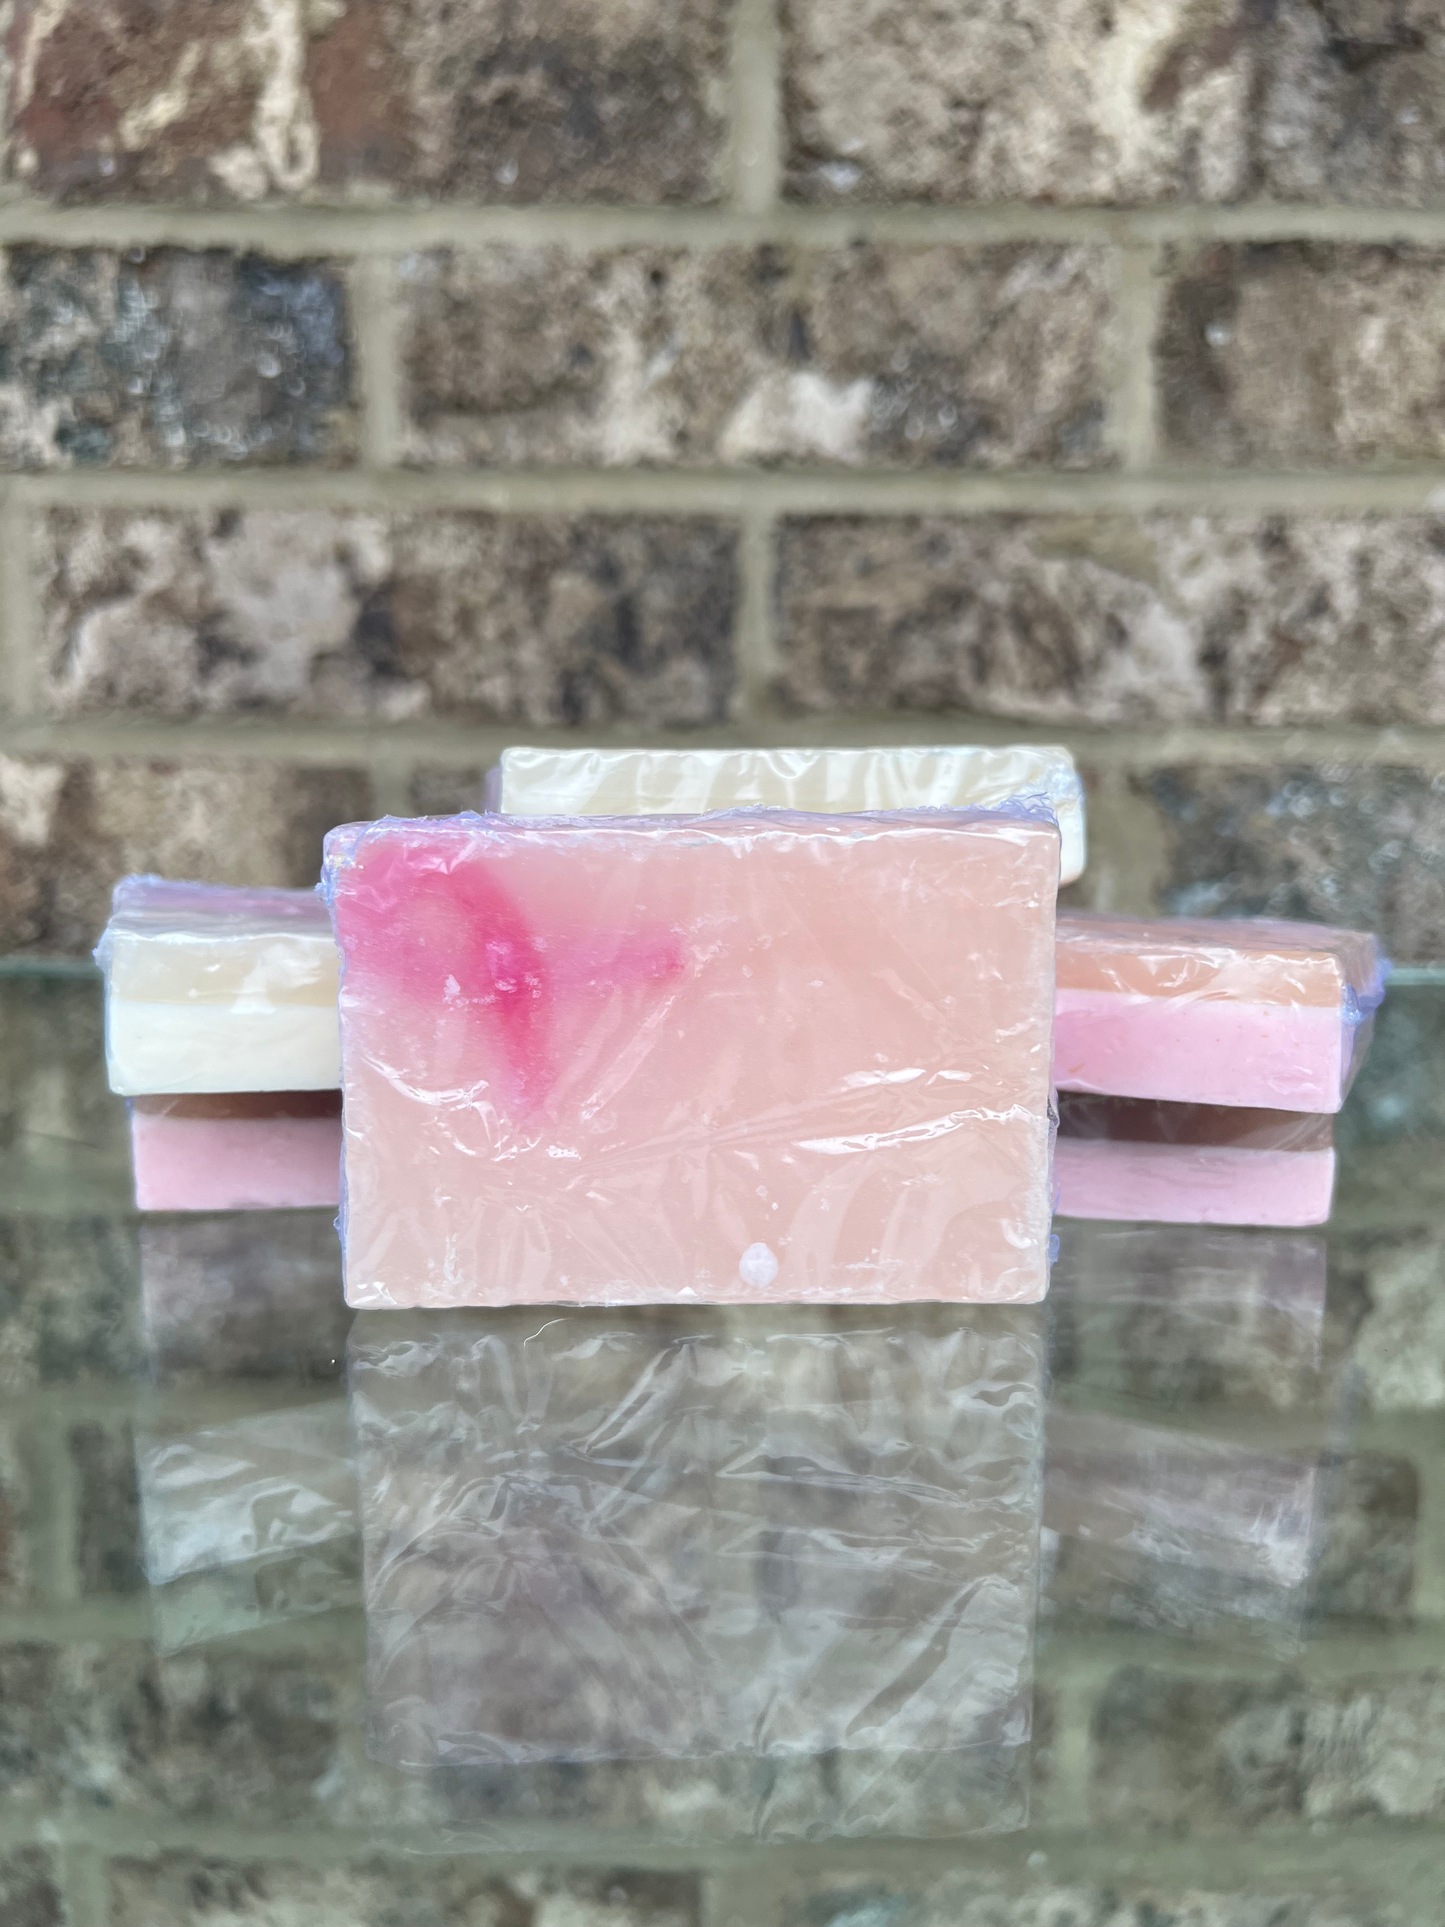 Breast Cancer Awareness Soaps  As Breast Cancer Awareness Month commences each during the month of October, Full Circle Candles is pleased to offer a limited release version of our Serenity soap bars. With your purchase, you can demonstrate your solidarity with survivors and commemorate those we have lost. Soaps are sold year-round.